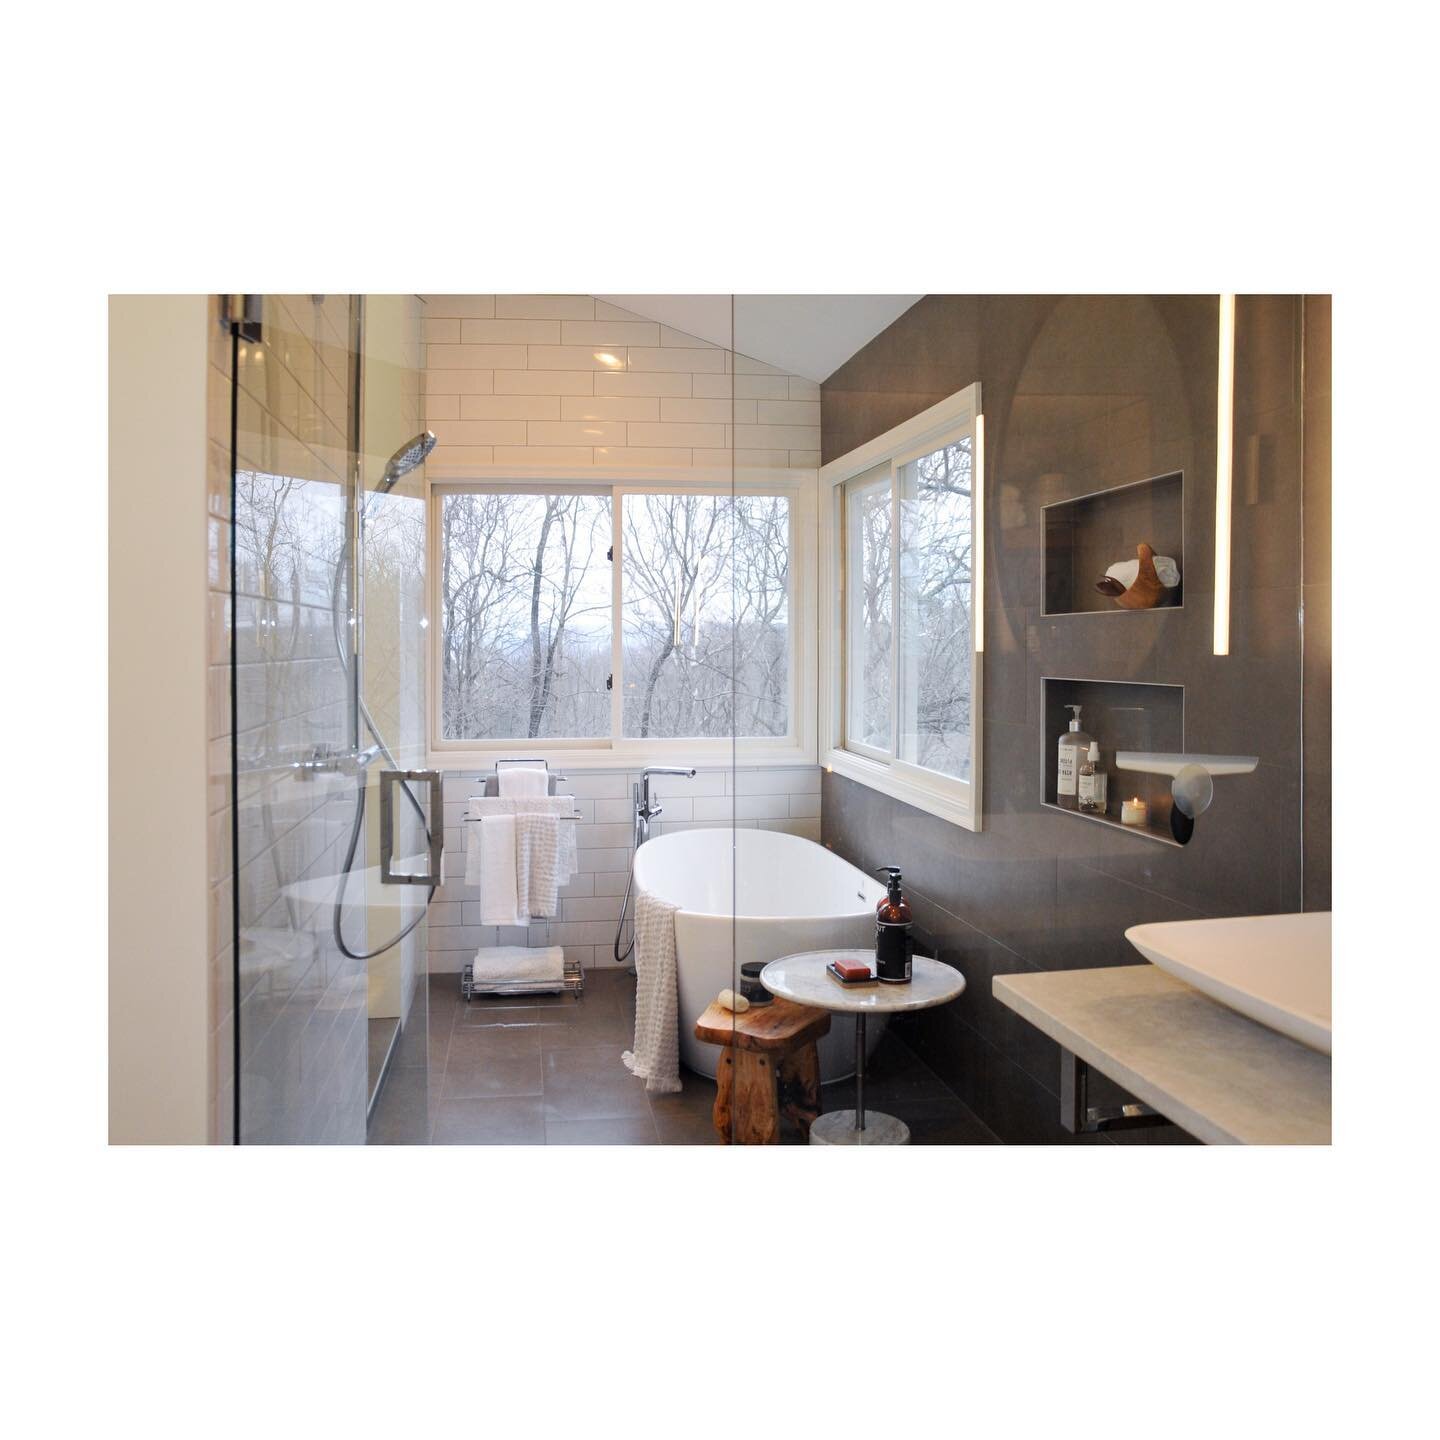 &bull;
&bull;
Quarantine, week one million: don&rsquo;t forget about self care. A calming bath (bonus points if you have a view!) would be the perfect place to relax for a few, like this bathroom project for one of our clients in Anderson &bull;